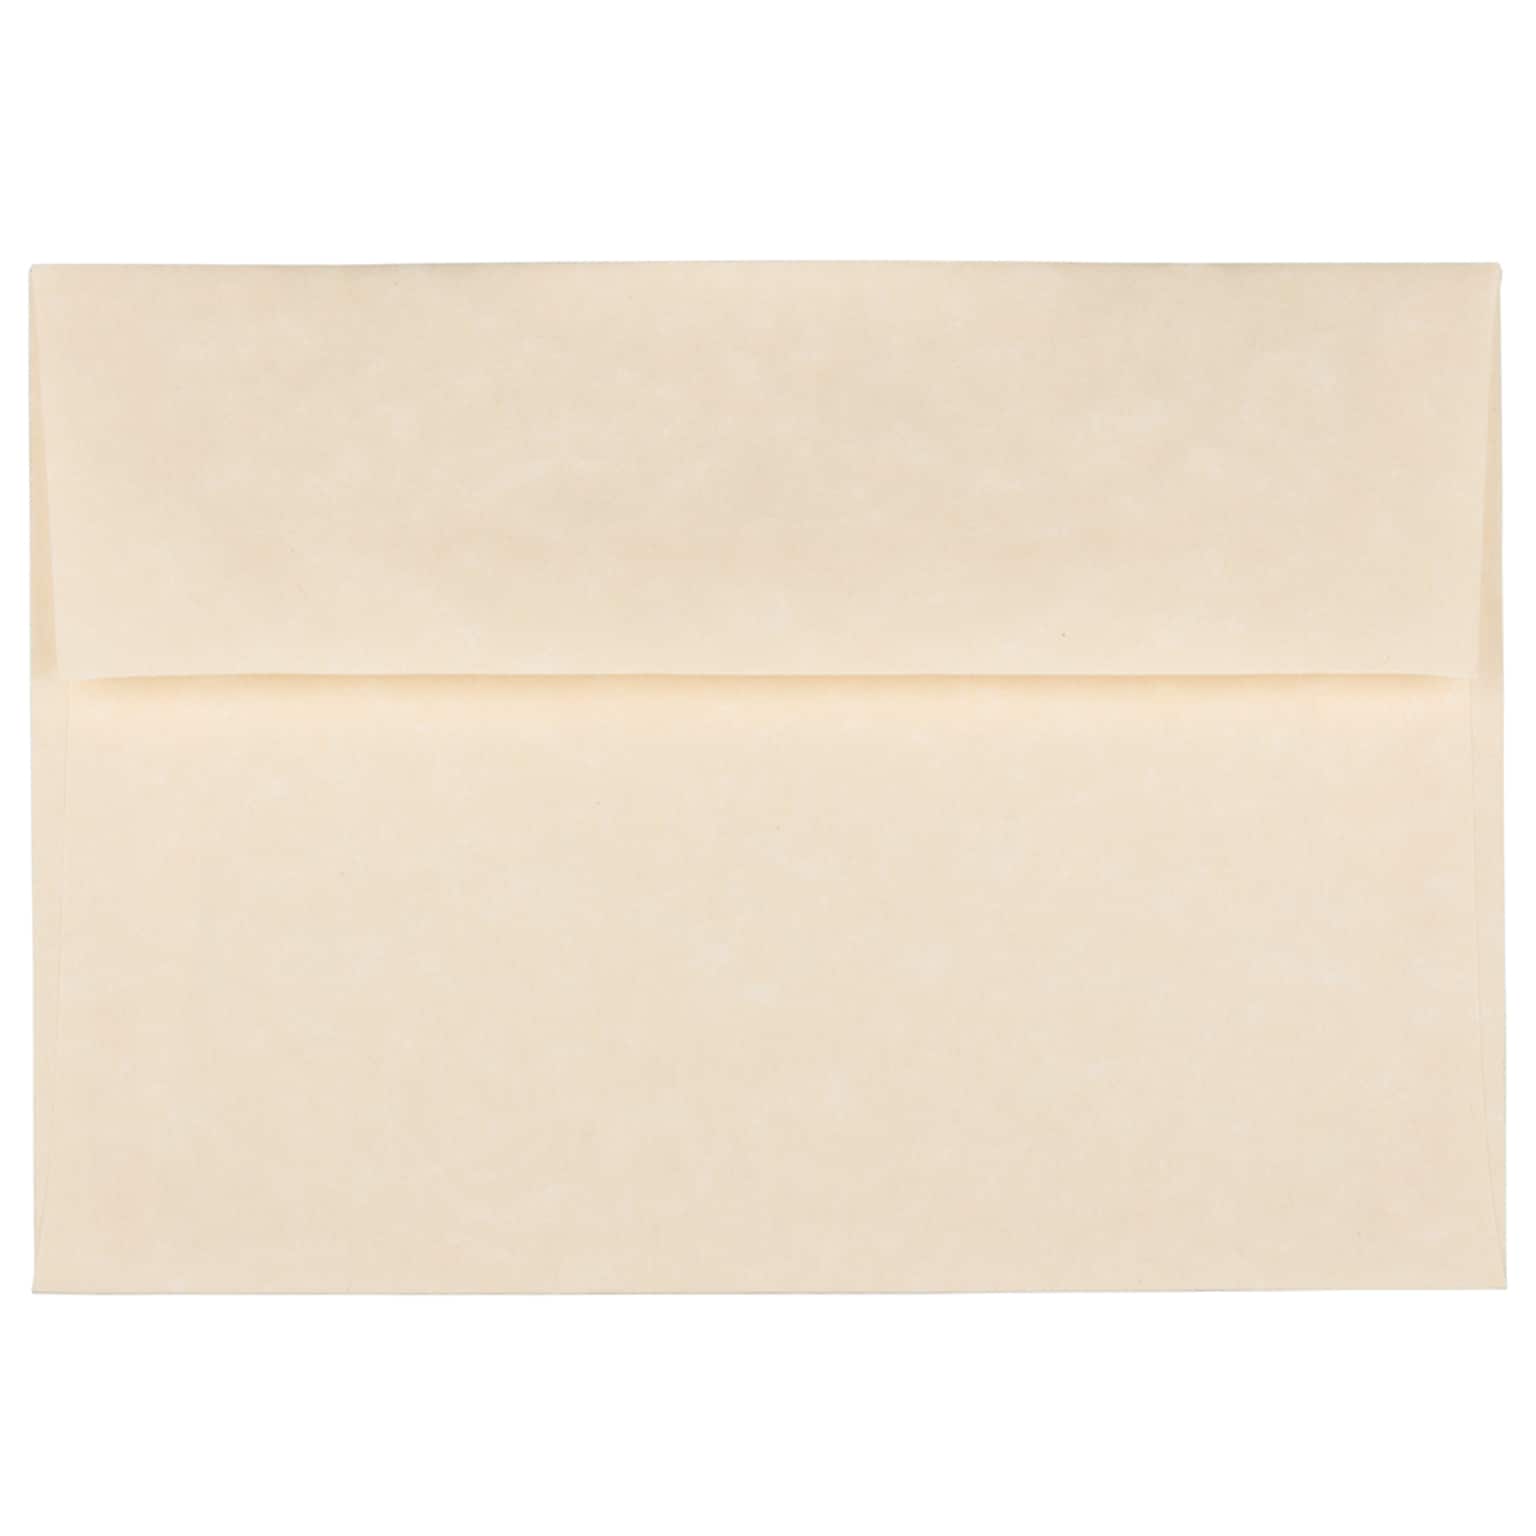 JAM Paper A7 Parchment Invitation Envelopes, 5.25 x 7.25, Natural Recycled, 25/Pack (35394)